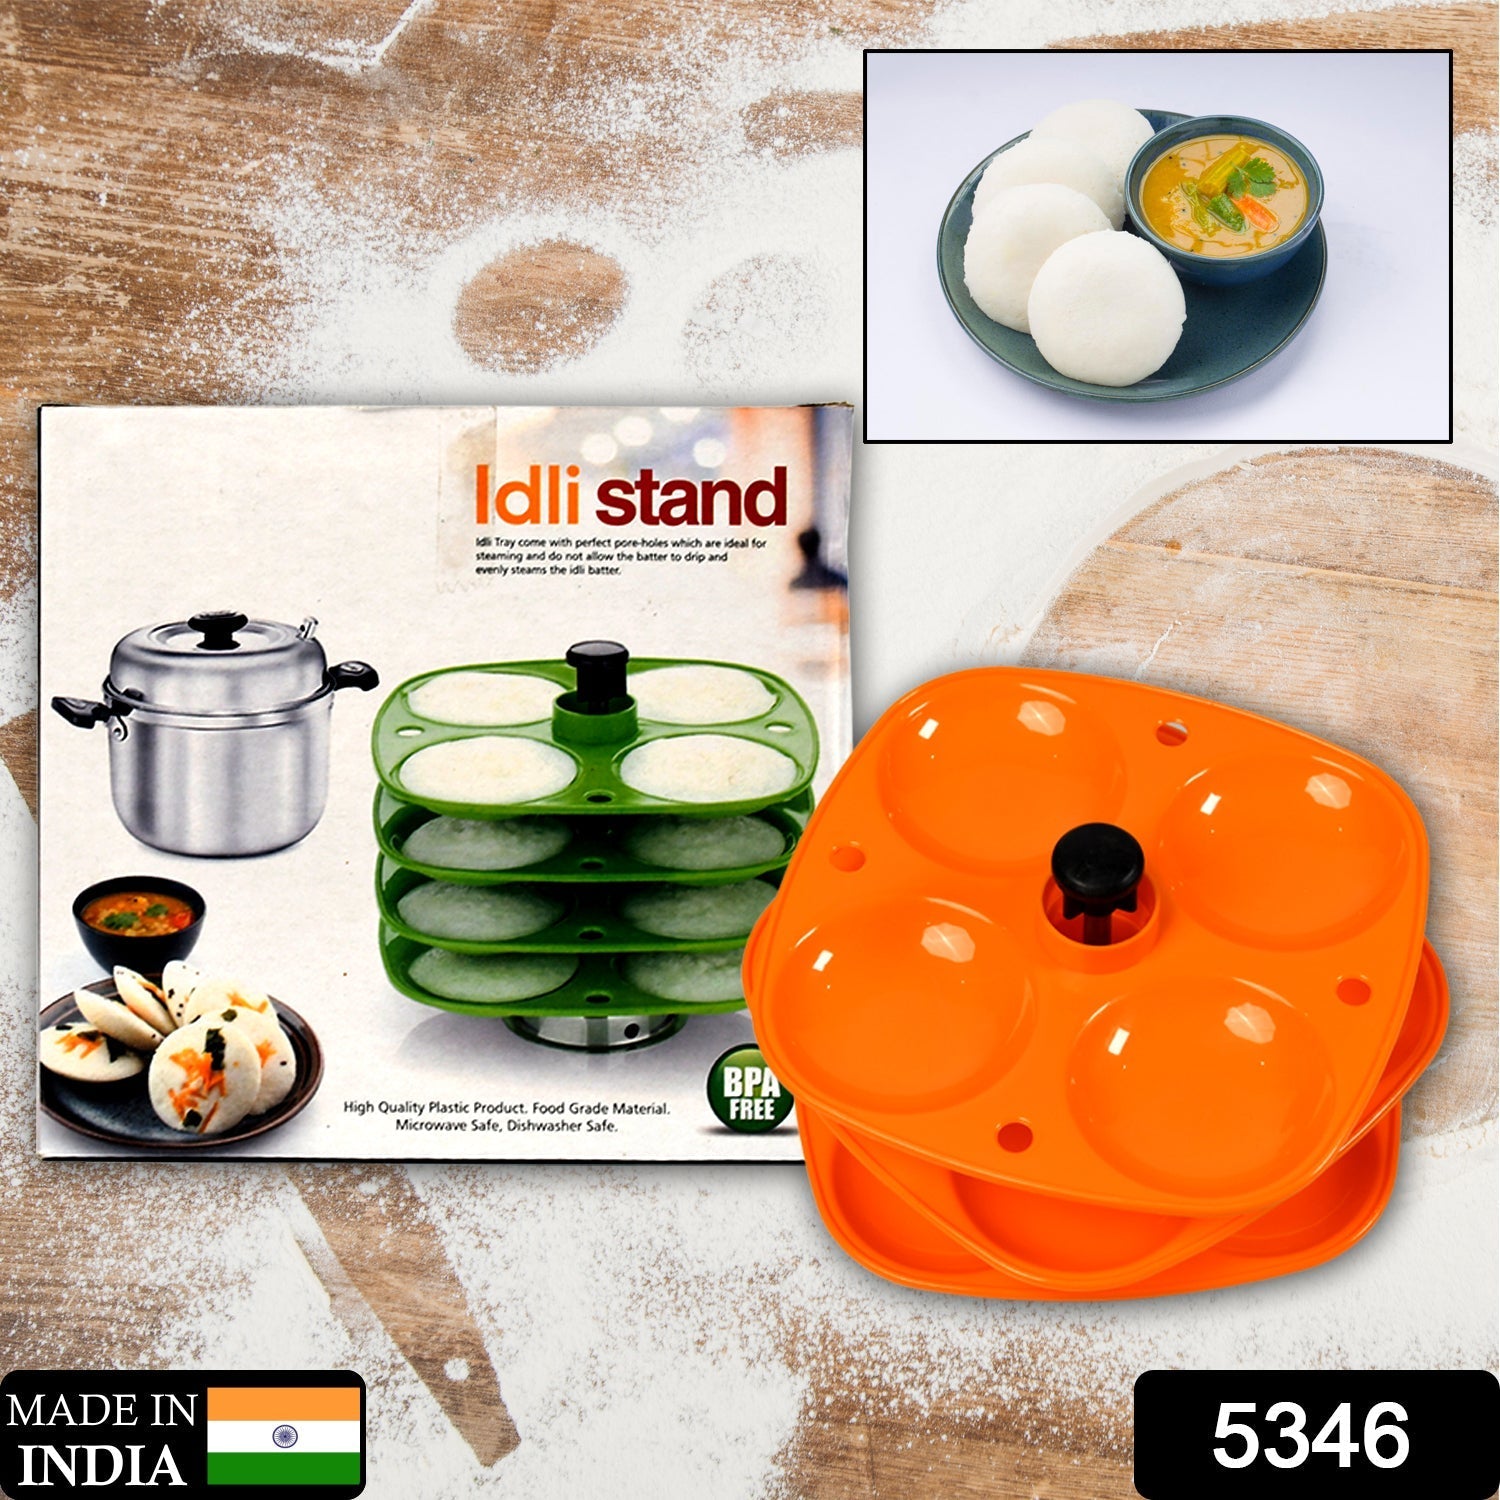 5346 3 Layer Idli Stand used in all kinds of household kitchen purposes for holding and serving idlis. DeoDap